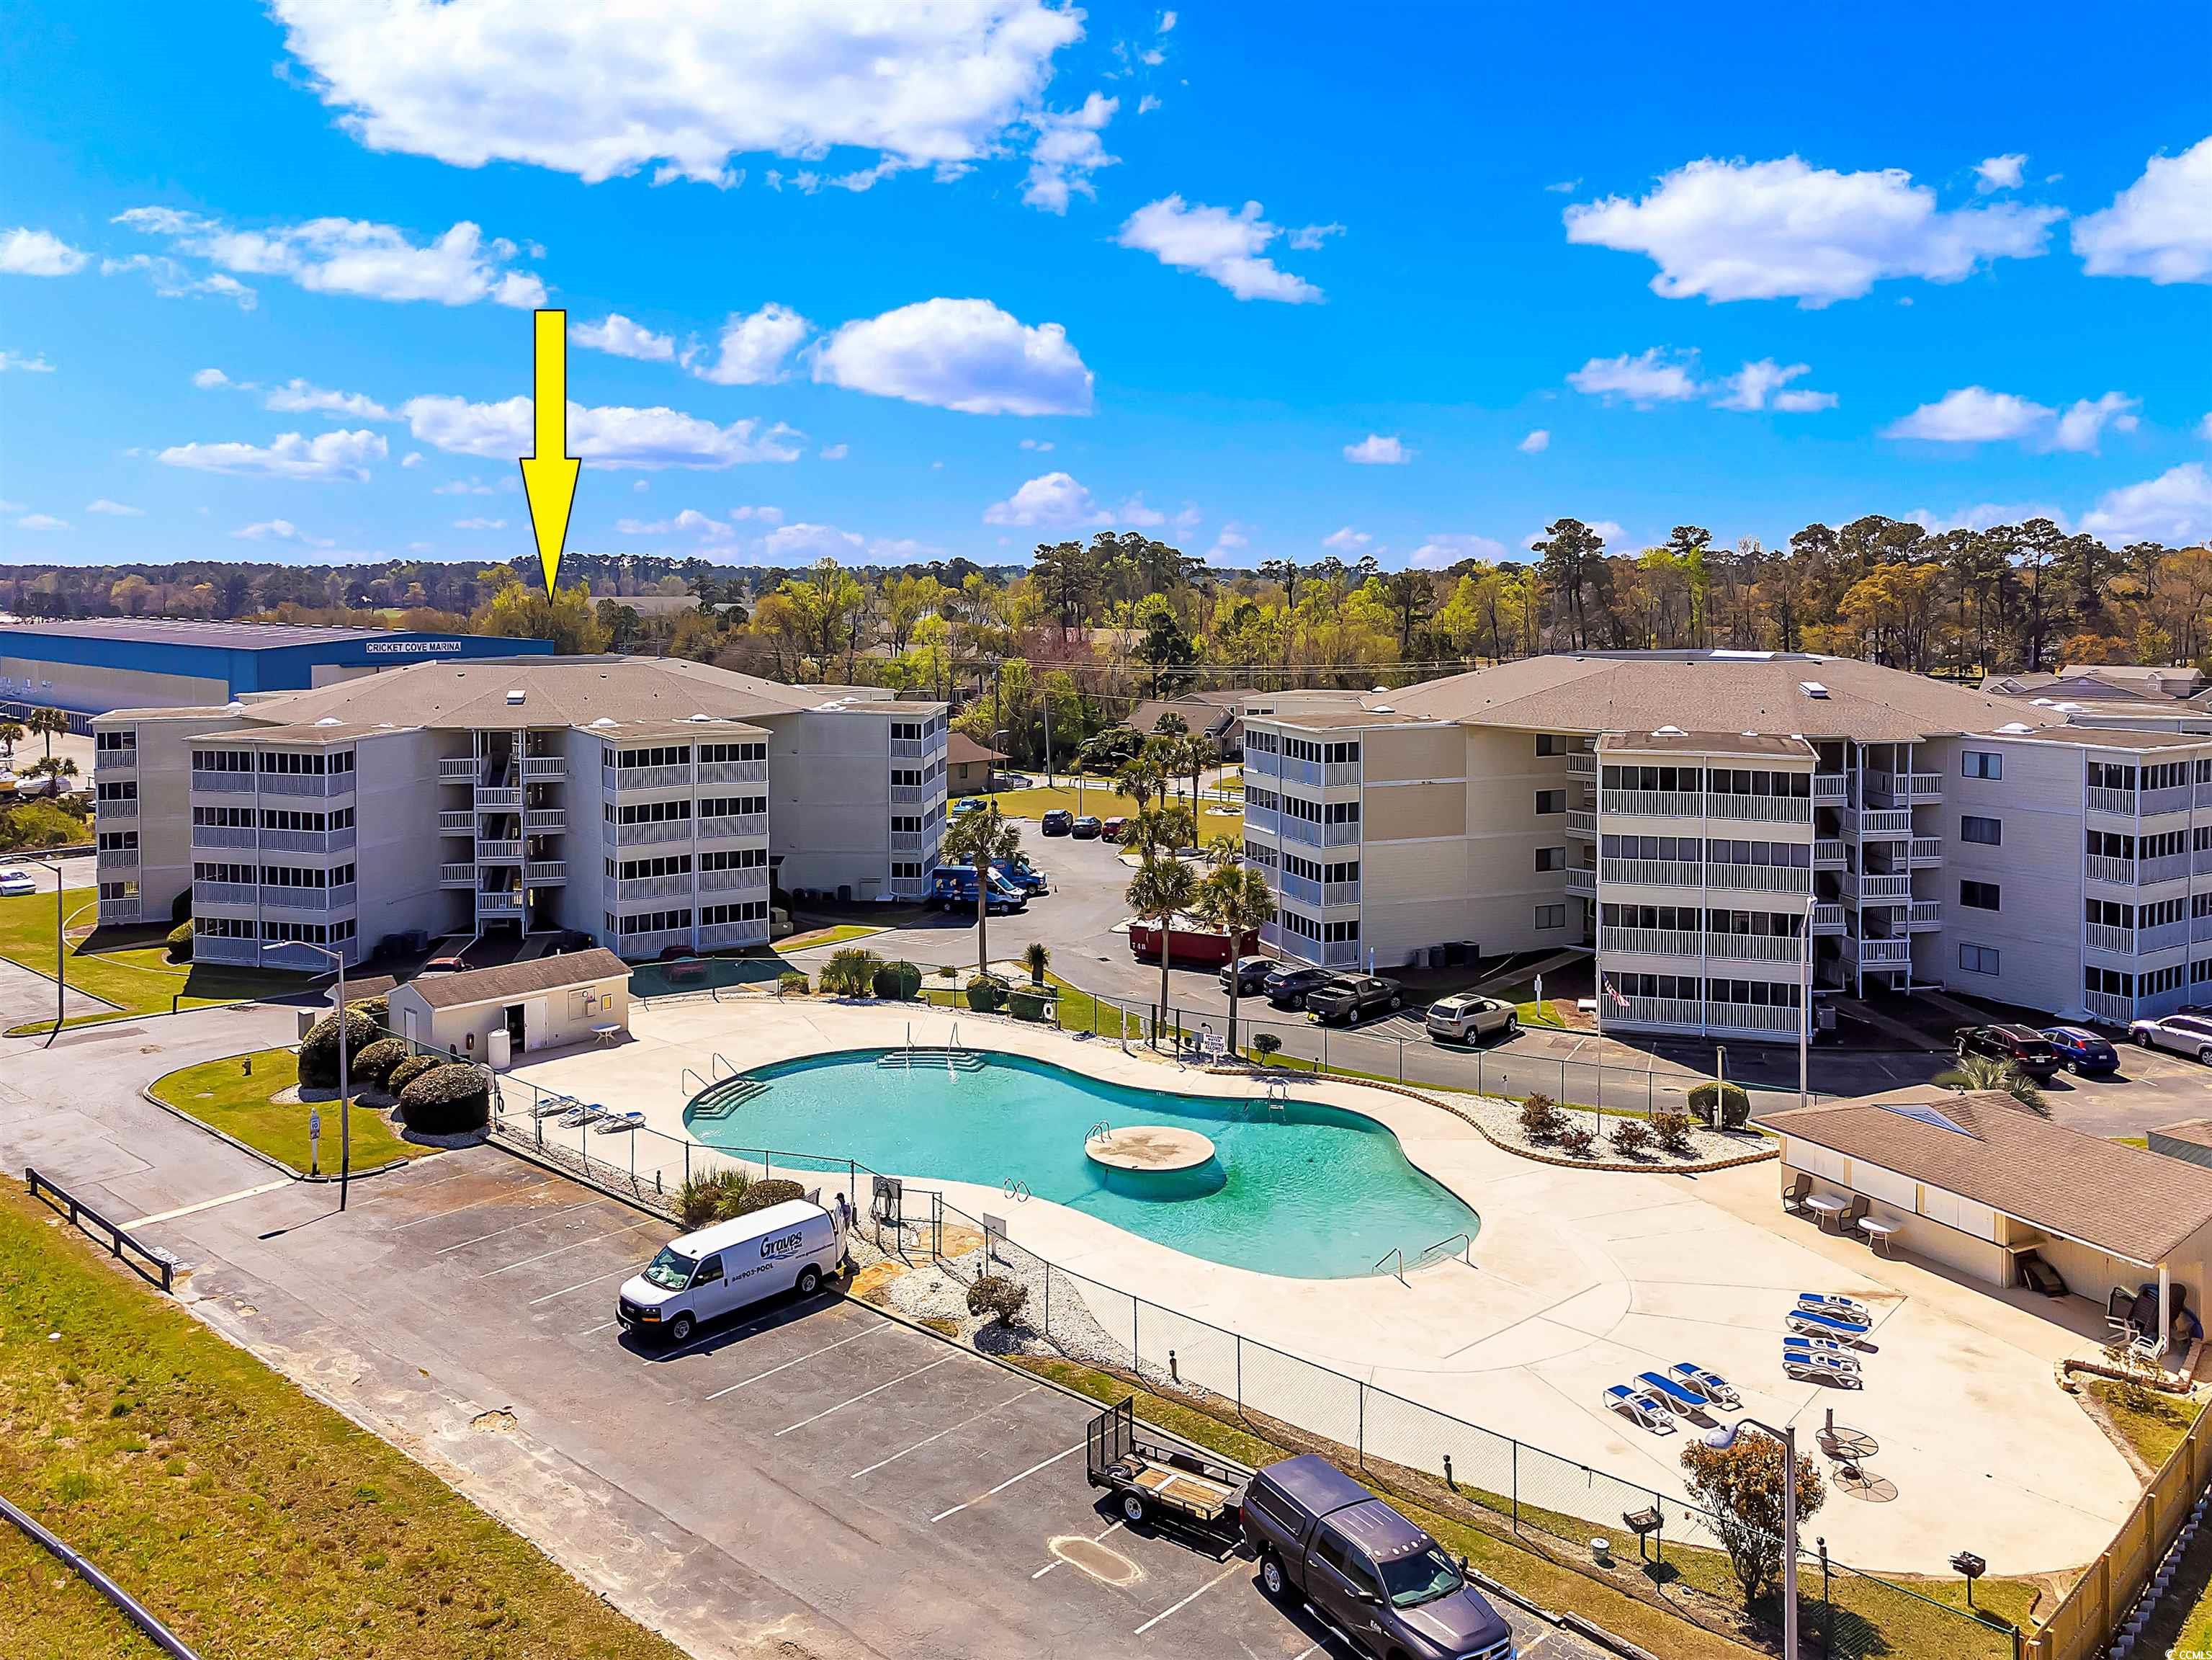 this completely renovated condo is nestled on the first floor of intercoastal village, this little gem of a condo is a true diamond in the rough. the living room and dining area are great, with large sliding doors that let in plenty of natural light and lead out to the screened in porch! the kitchen is a blank canvas, waiting for your personal touch to turn it into a chef's dream. the bedroom is cozy and comfortable, with a private bathroom. intercoastal village is a sought-after community in a great location. the community offers a pool, and is a short walk to cricket cove marina which features the hidden gem, snookys, a restaurant right on the water at the marina! located just minutes away from the beach, shopping, and dining, this community is a prime location for a vacation home or a year-round residence. 3 minute drive from valley at east port golf club! 6-minute drive from mcleod health seacoast hospital. 8 minute drive from la belle amie vineyard! 4-minute drive from vereen memorial historical gardens! if you're looking for an investment opportunity that promises great returns, this is the condo for you. with a complete remodel, this condo has the potential to become a one of a kind property in this area. don't miss out on this rare opportunity to own a piece of paradise in intercoastal village. contact us today to schedule a tour!